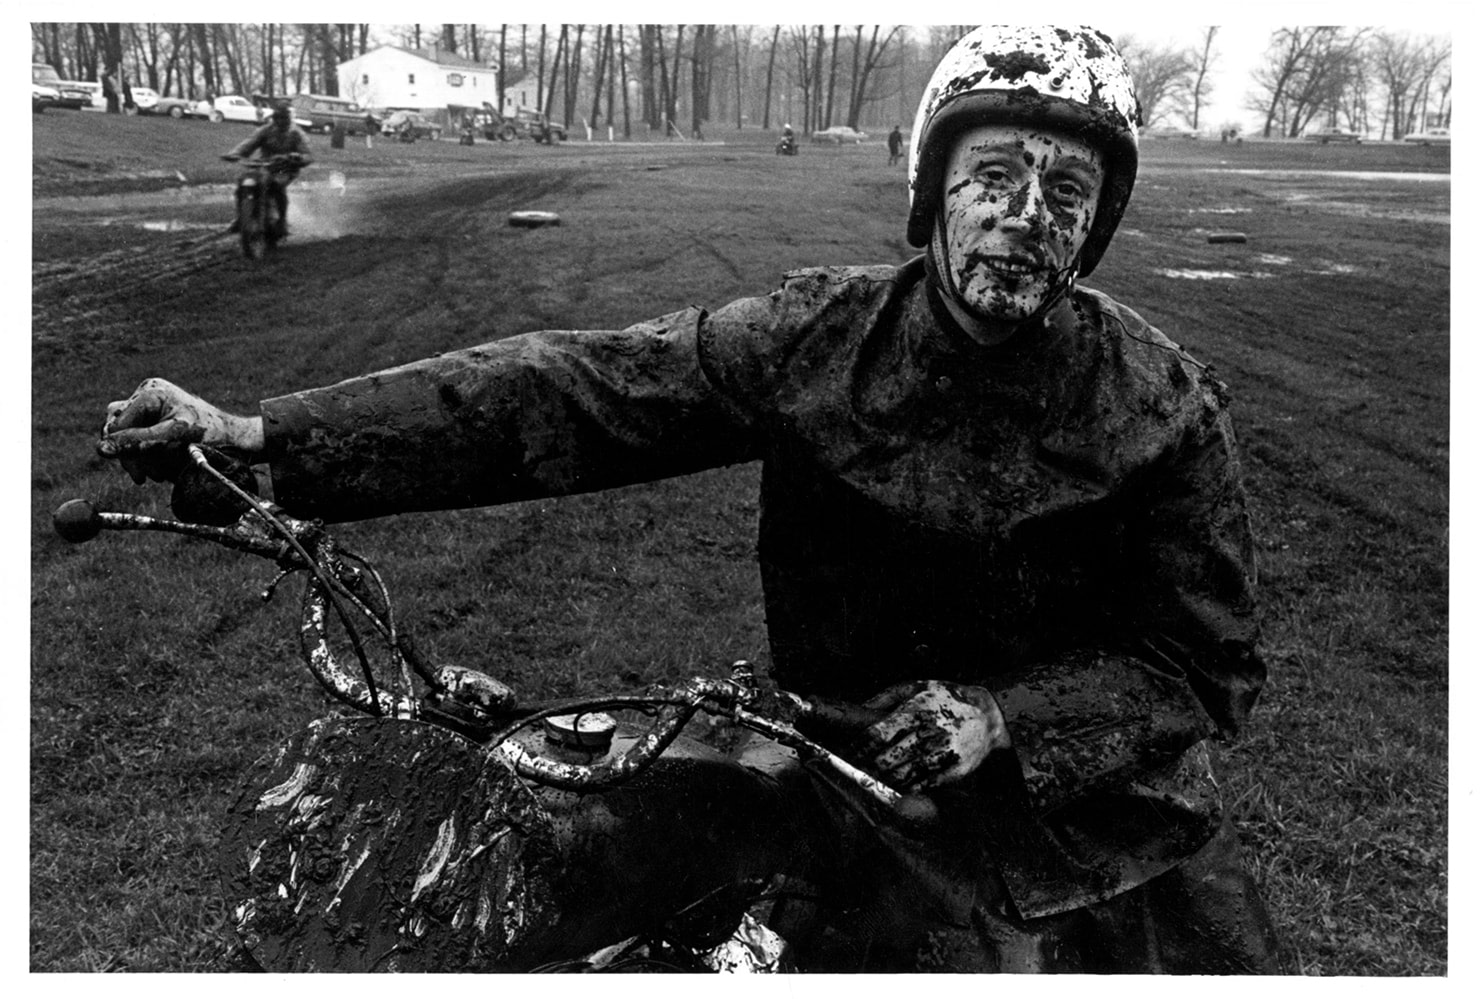 Copyright Danny Lyon / Magnum Photos, Racer, Shererville, Indiana, from The Bikeriders, 1965